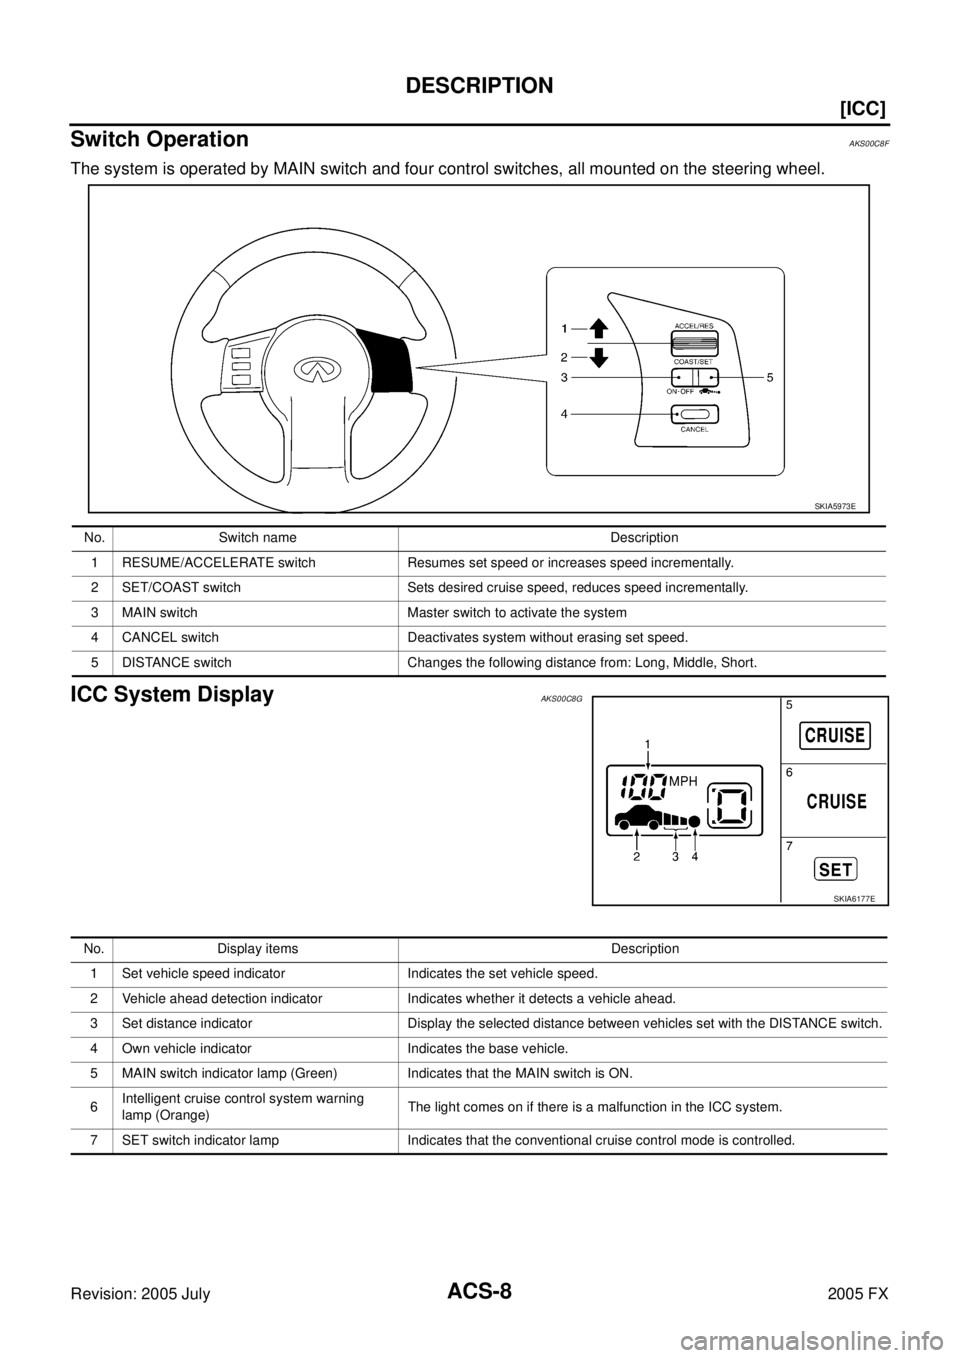 INFINITI FX35 2005  Service Manual ACS-8
[ICC]
DESCRIPTION
Revision: 2005 July 2005 FX
Switch OperationAKS00C8F
The system is operated by MAIN switch and four control switches, all mounted on the steering wheel.
ICC System DisplayAKS00